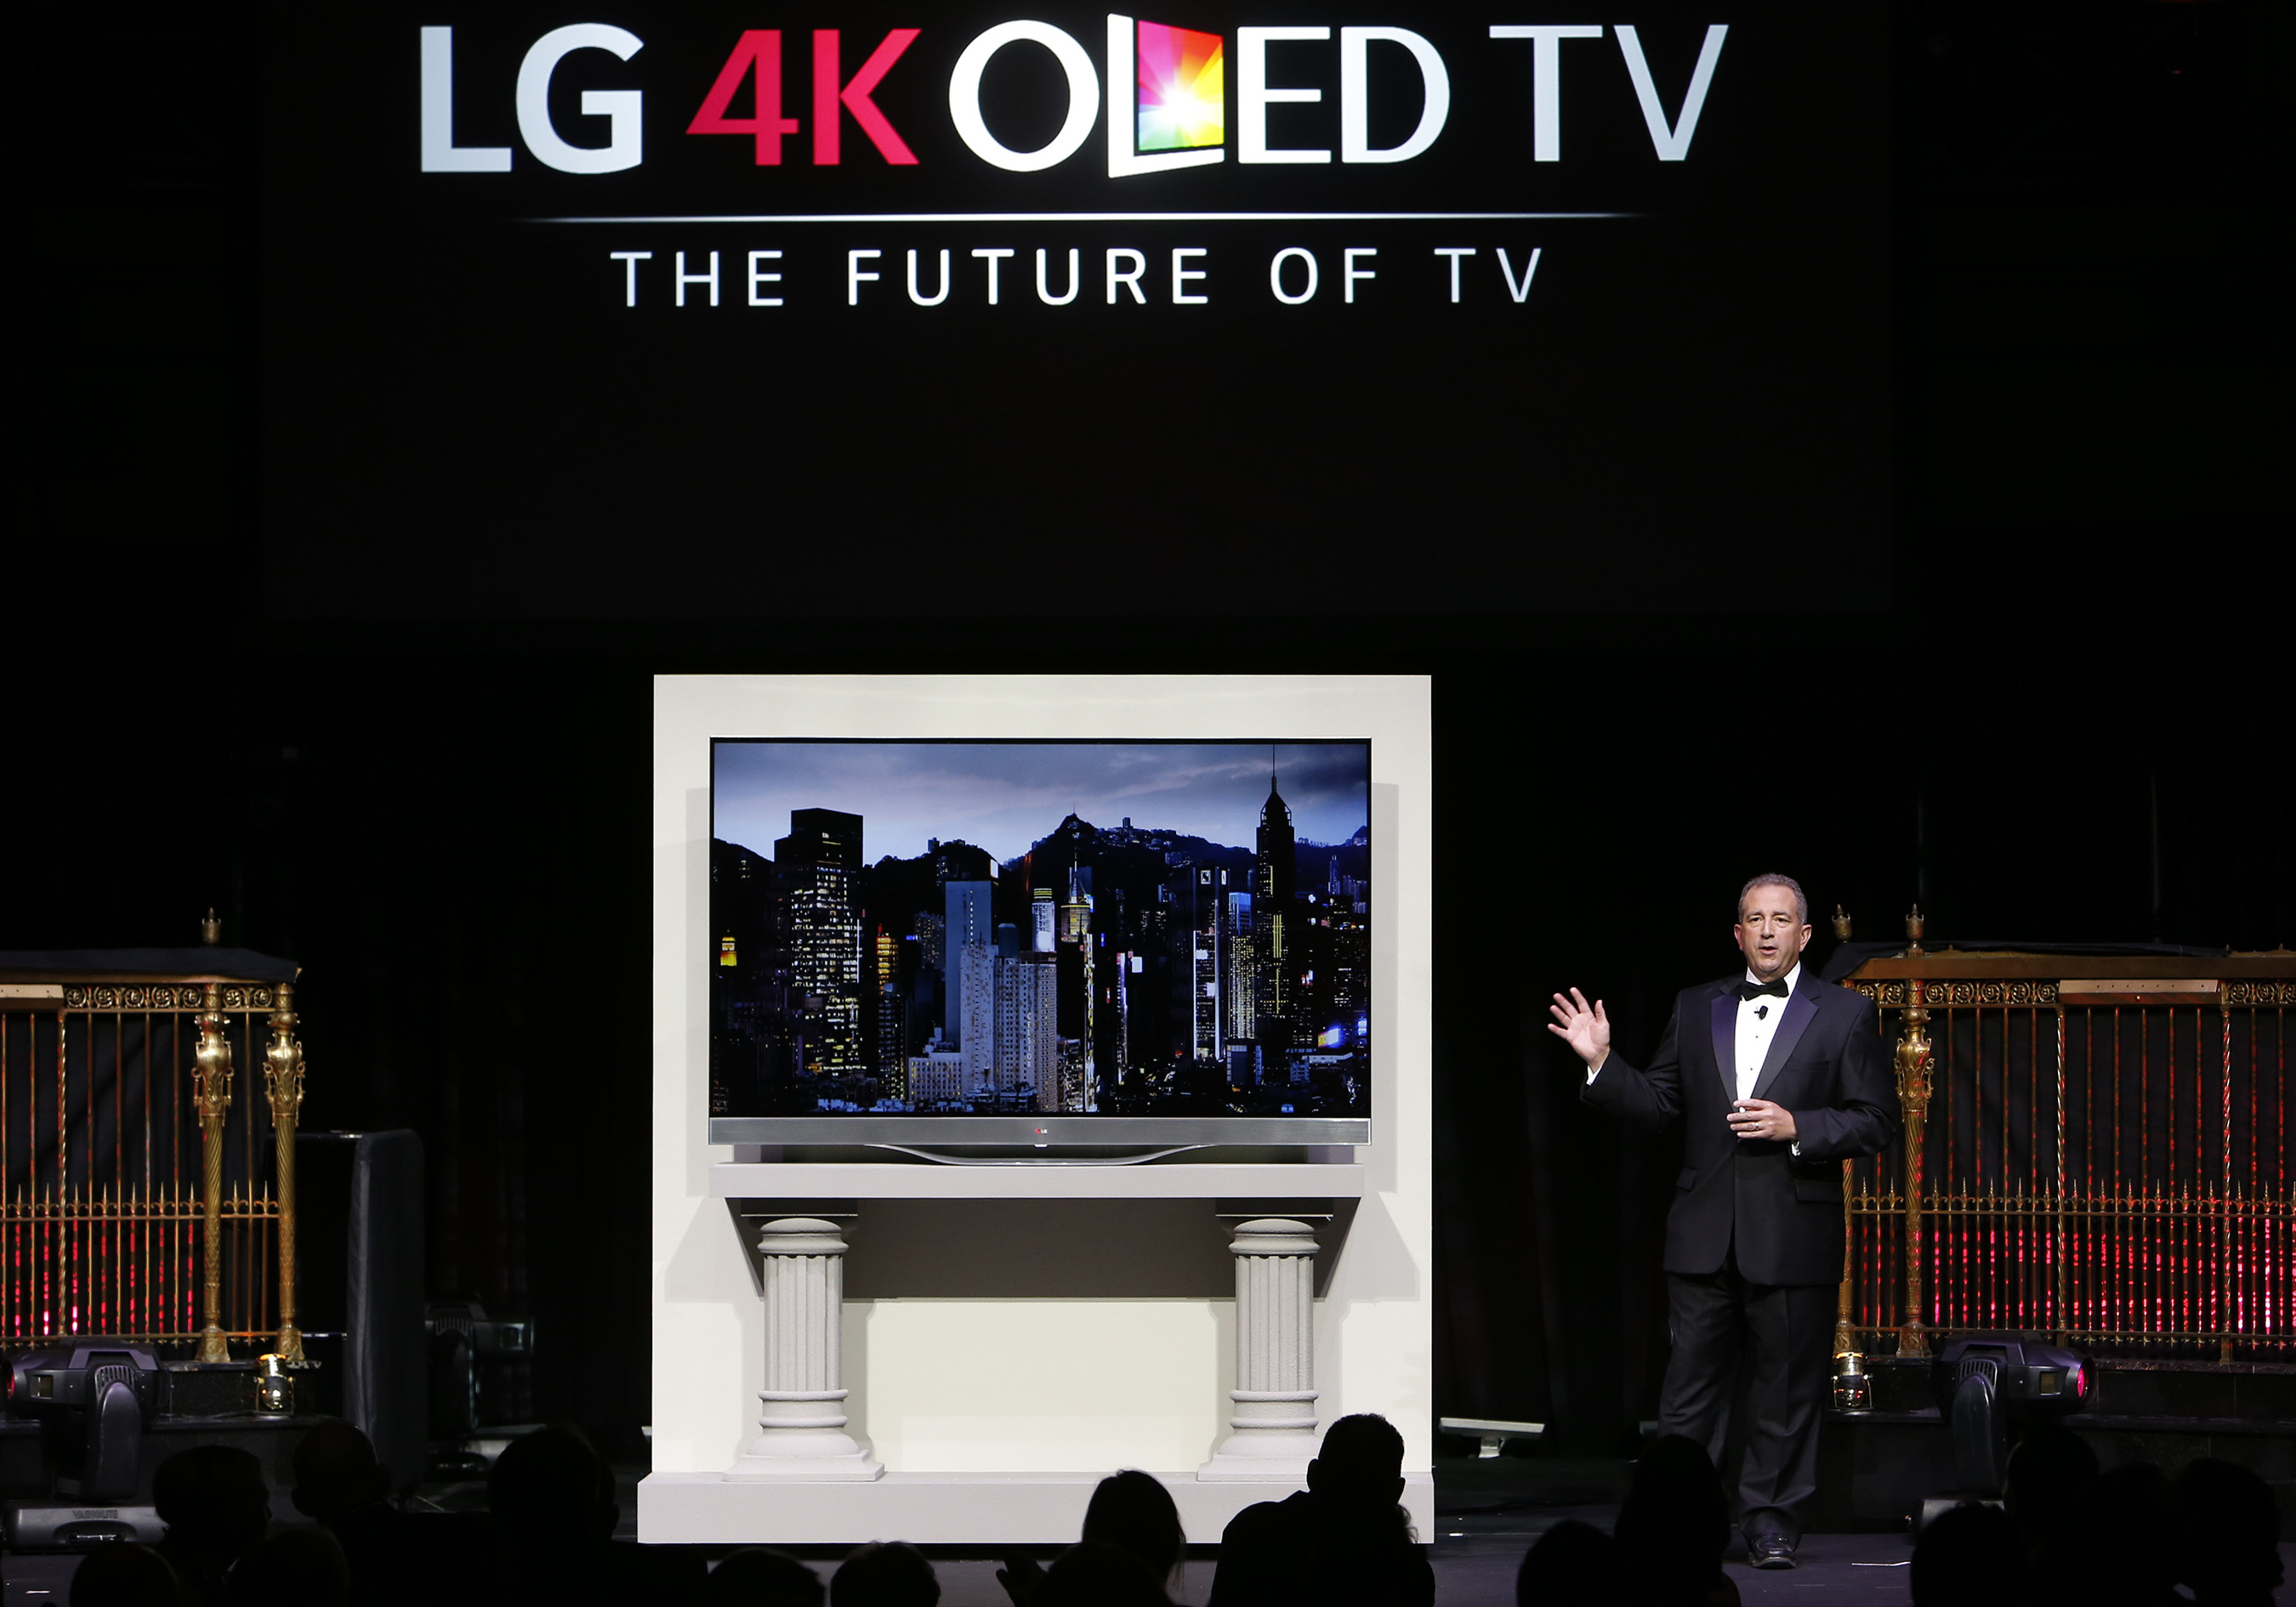 LG Electronics’ Tim Alessi unveils the first of its kind Ultra HD 4K OLED TV